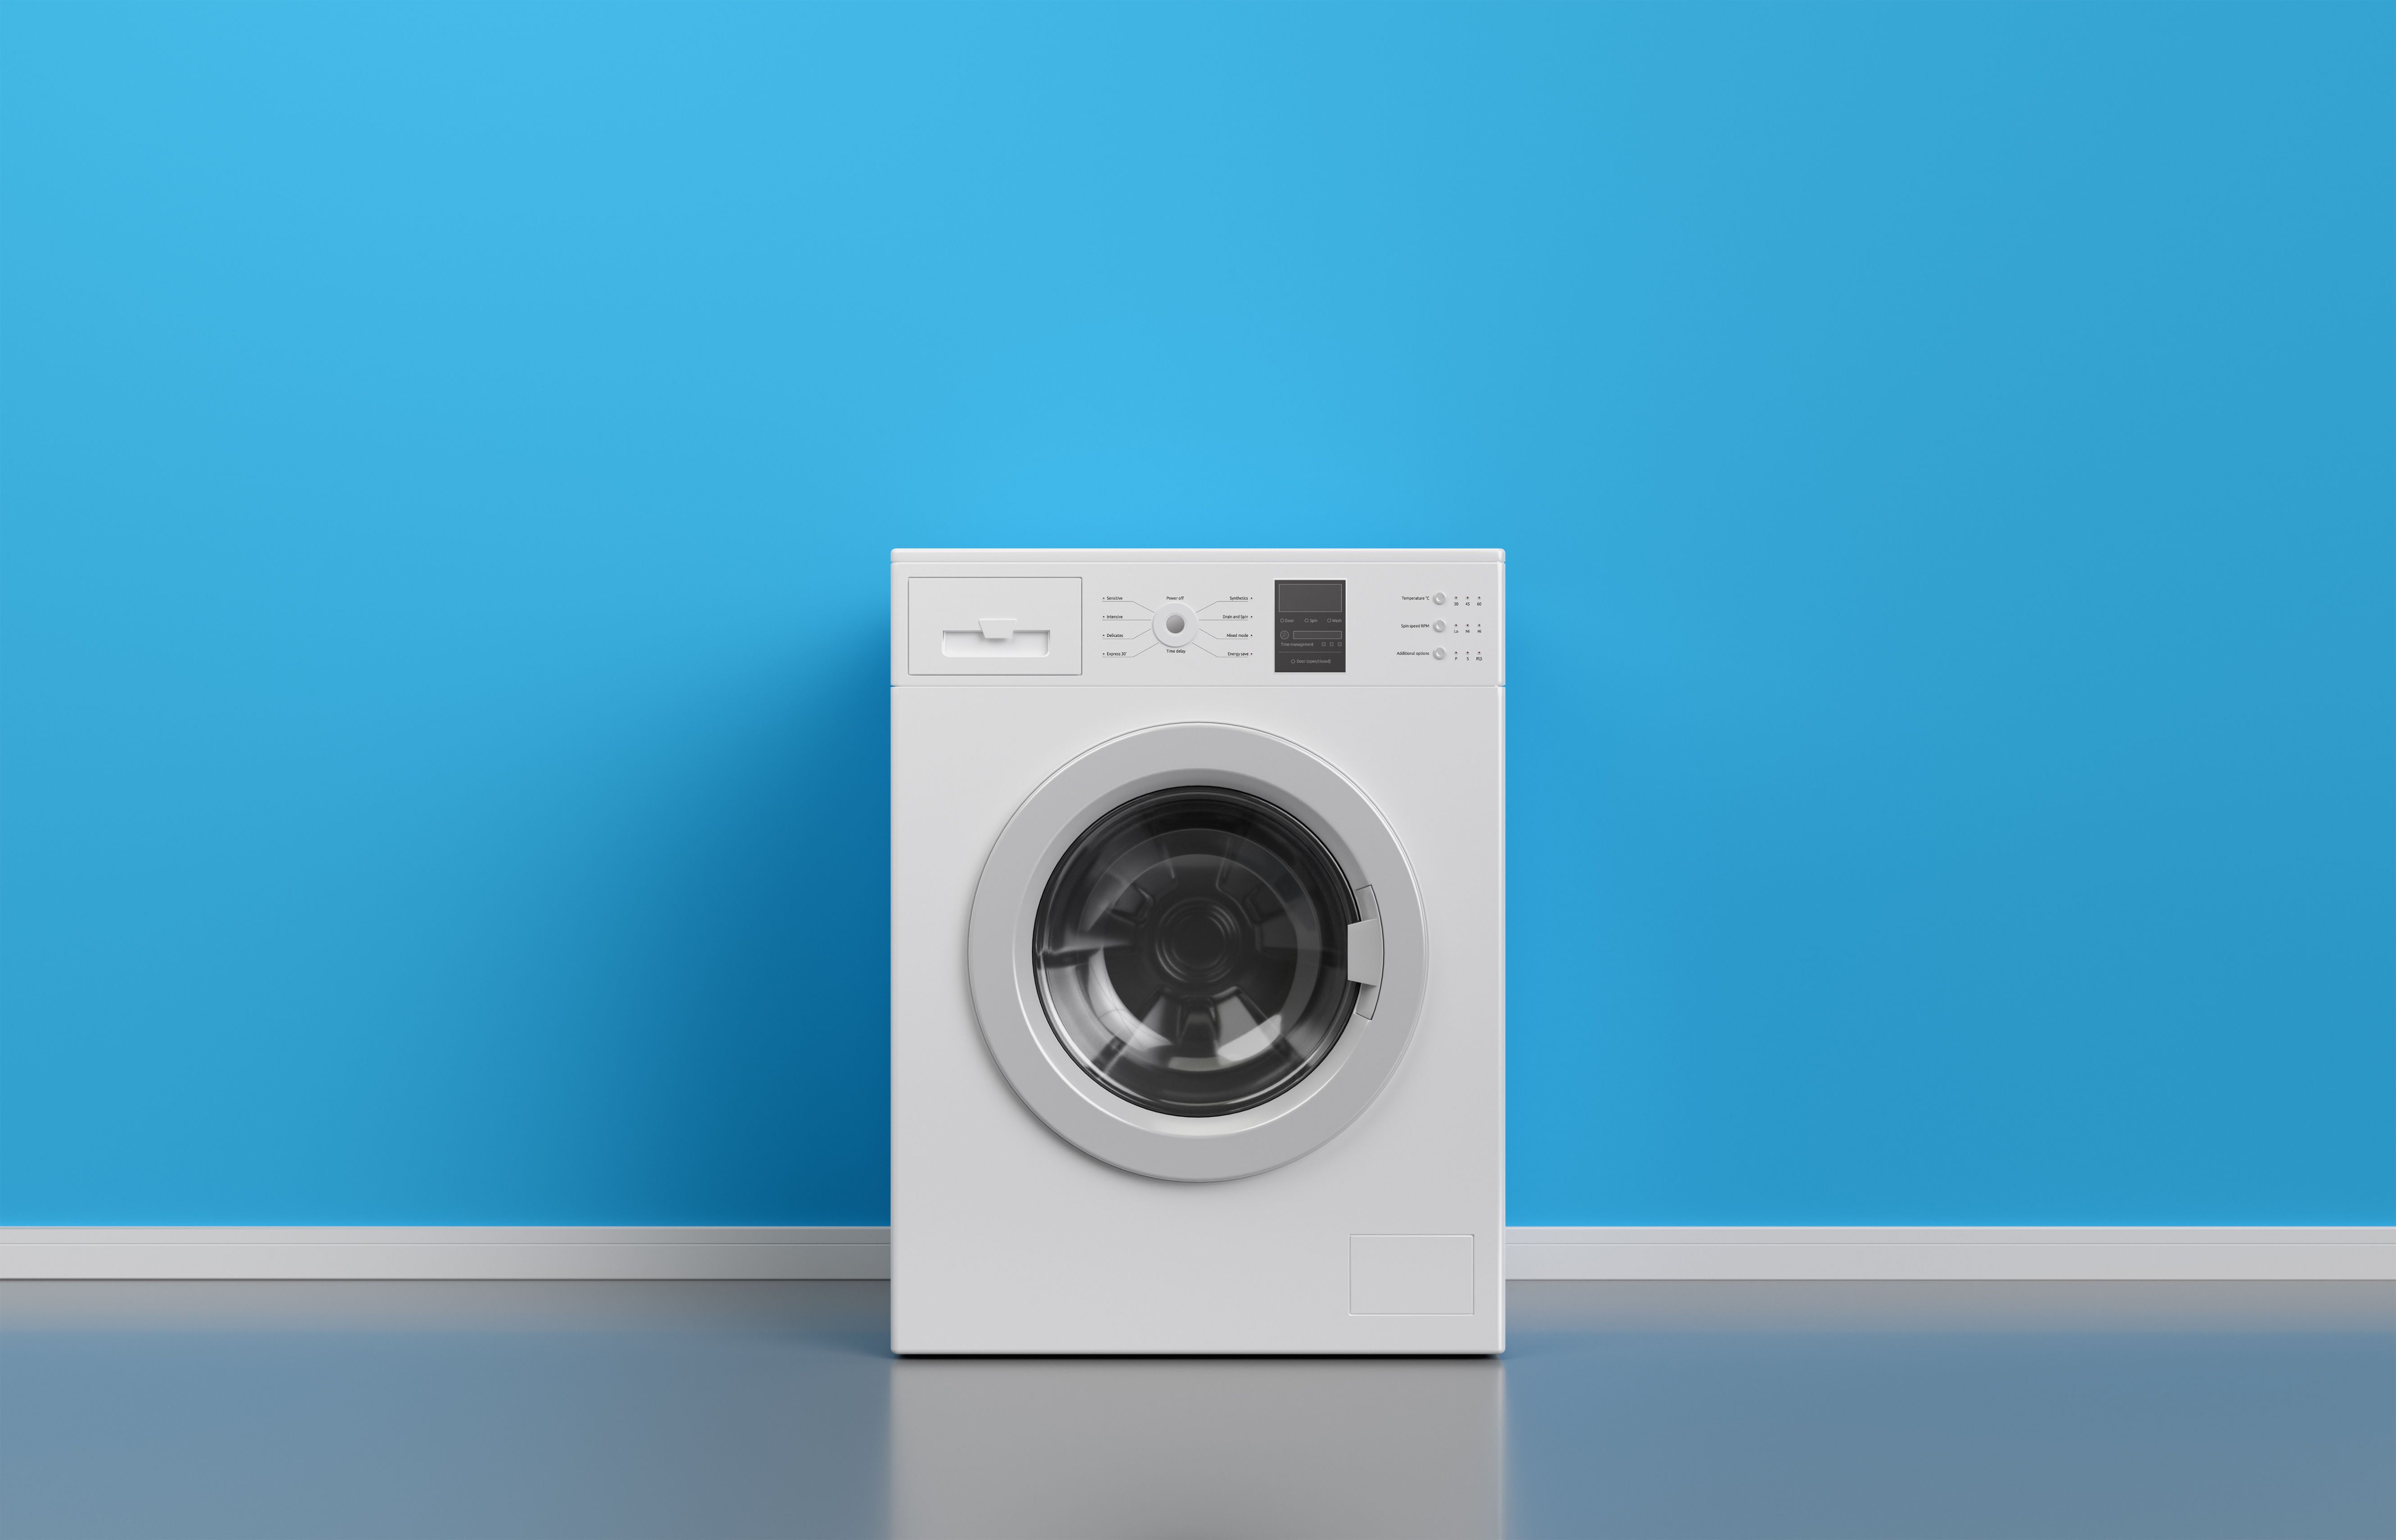 https://hips.hearstapps.com/hmg-prod/images/washing-machine-at-blue-wall-frontal-view-with-copy-royalty-free-image-1096523200-1564593294.jpg